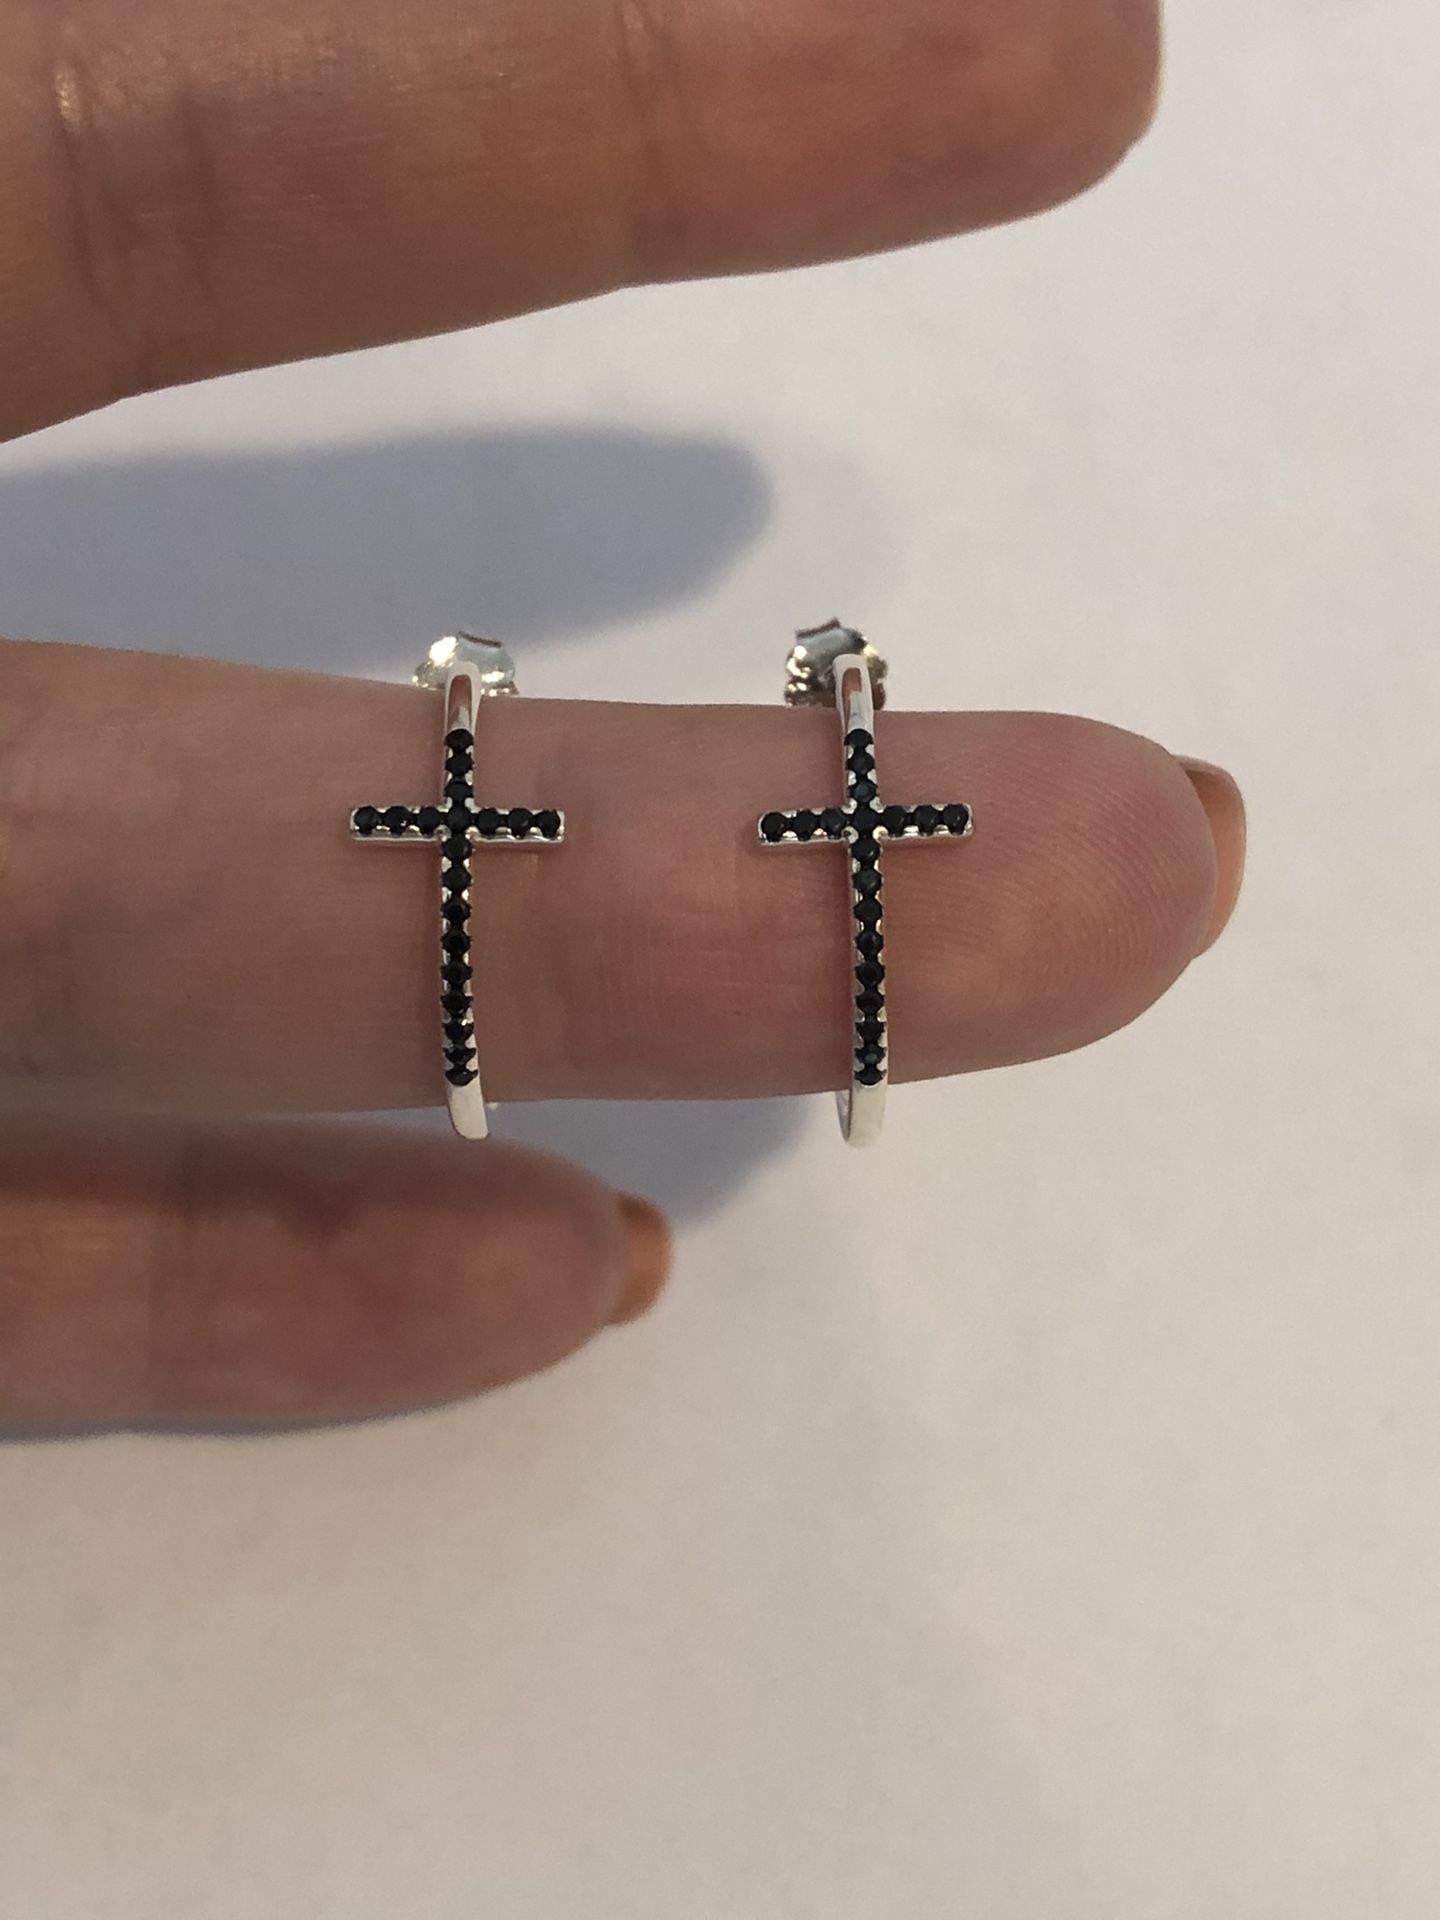 Brand New Sterling Silver 925 Cross Earnings with Black CZ Diamonds